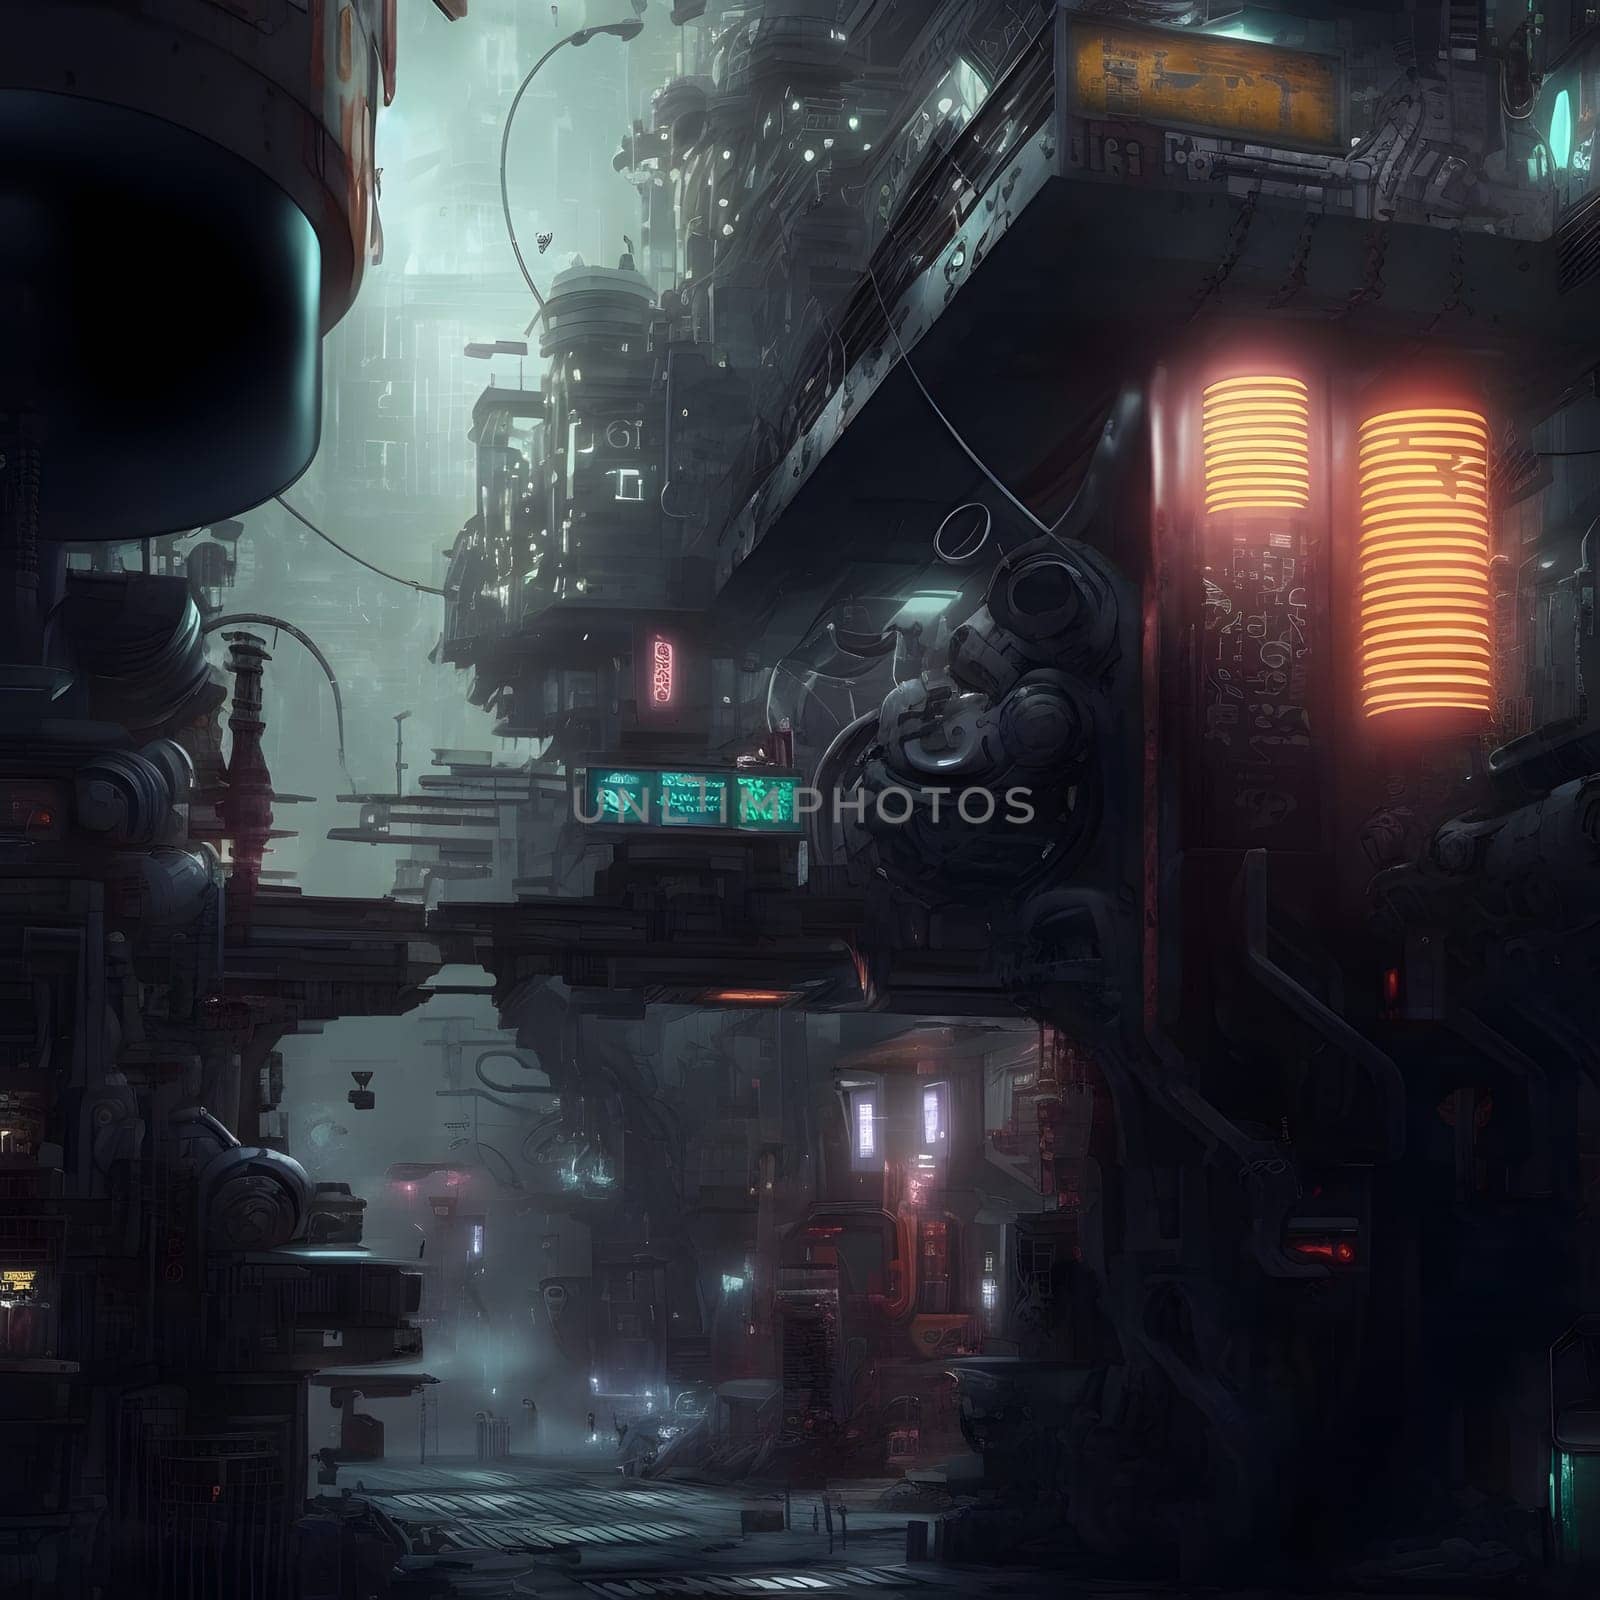 grim dystopian futuristic city street at foggy night, neural network generated art. Digitally generated image. Not based on any actual person, scene or pattern.